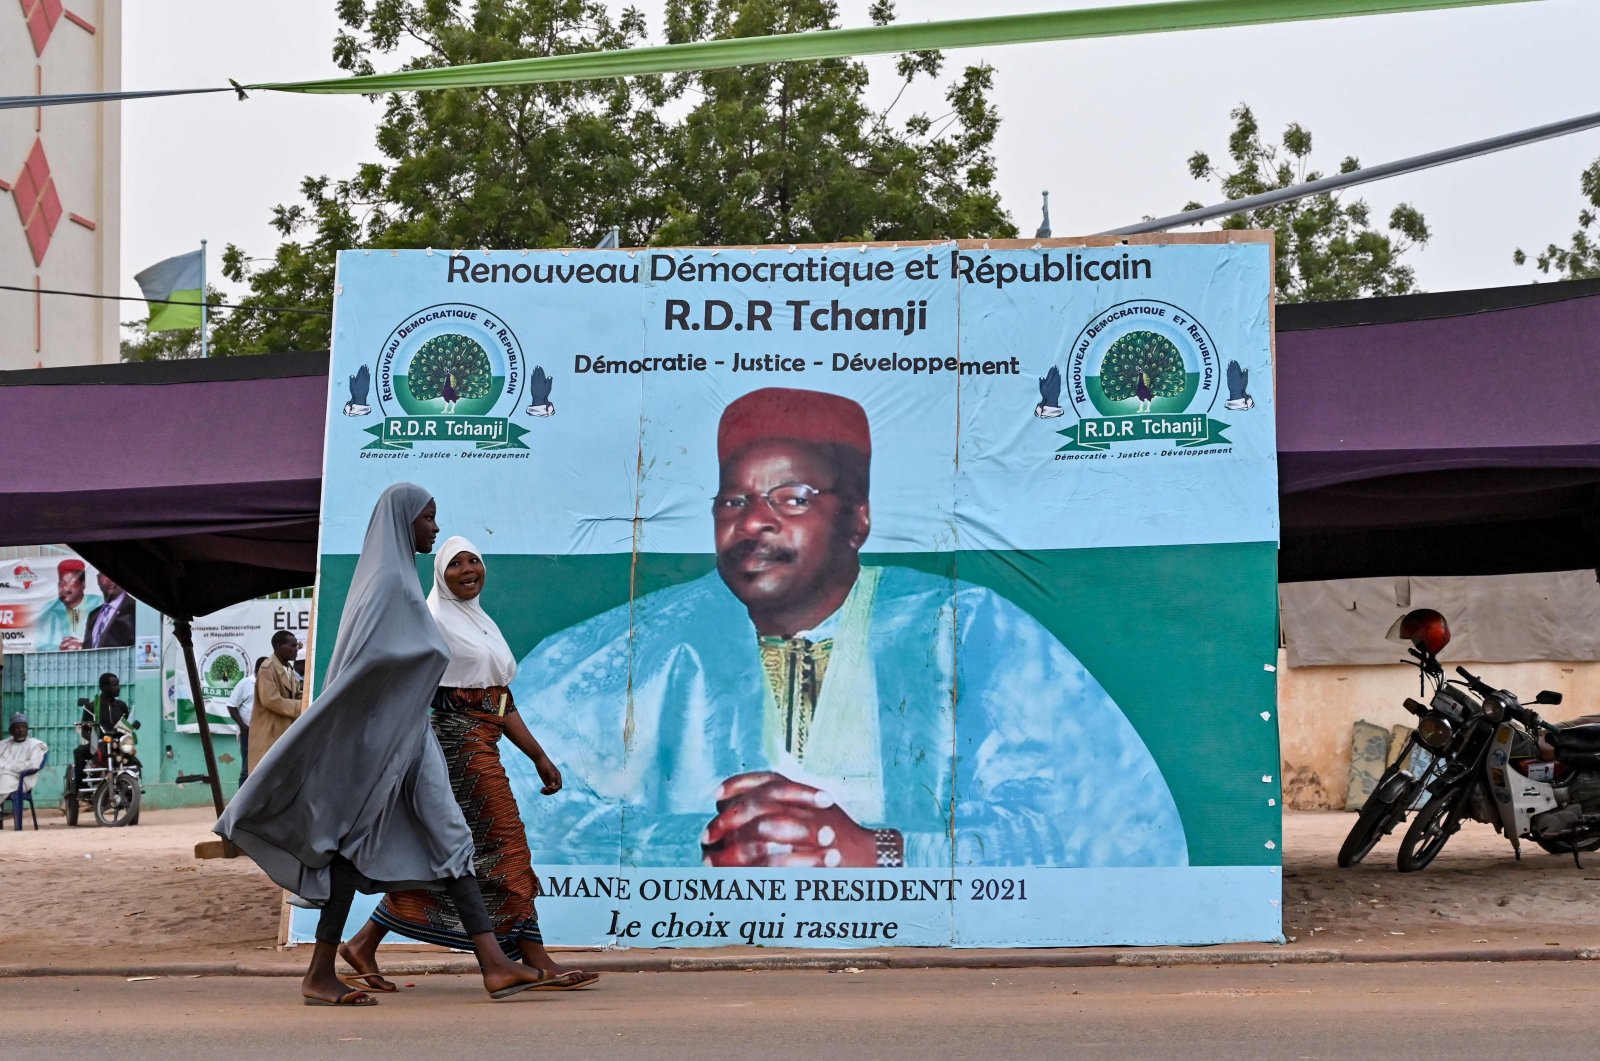 Women walk past a campaign poster of Niger's former president and presidential candidate, Mahamane Ousmane, ahead of Niger's presidential election runoff on Feb. 21, the capital Niamey, Feb. 18, 2021. (AFP Photo)